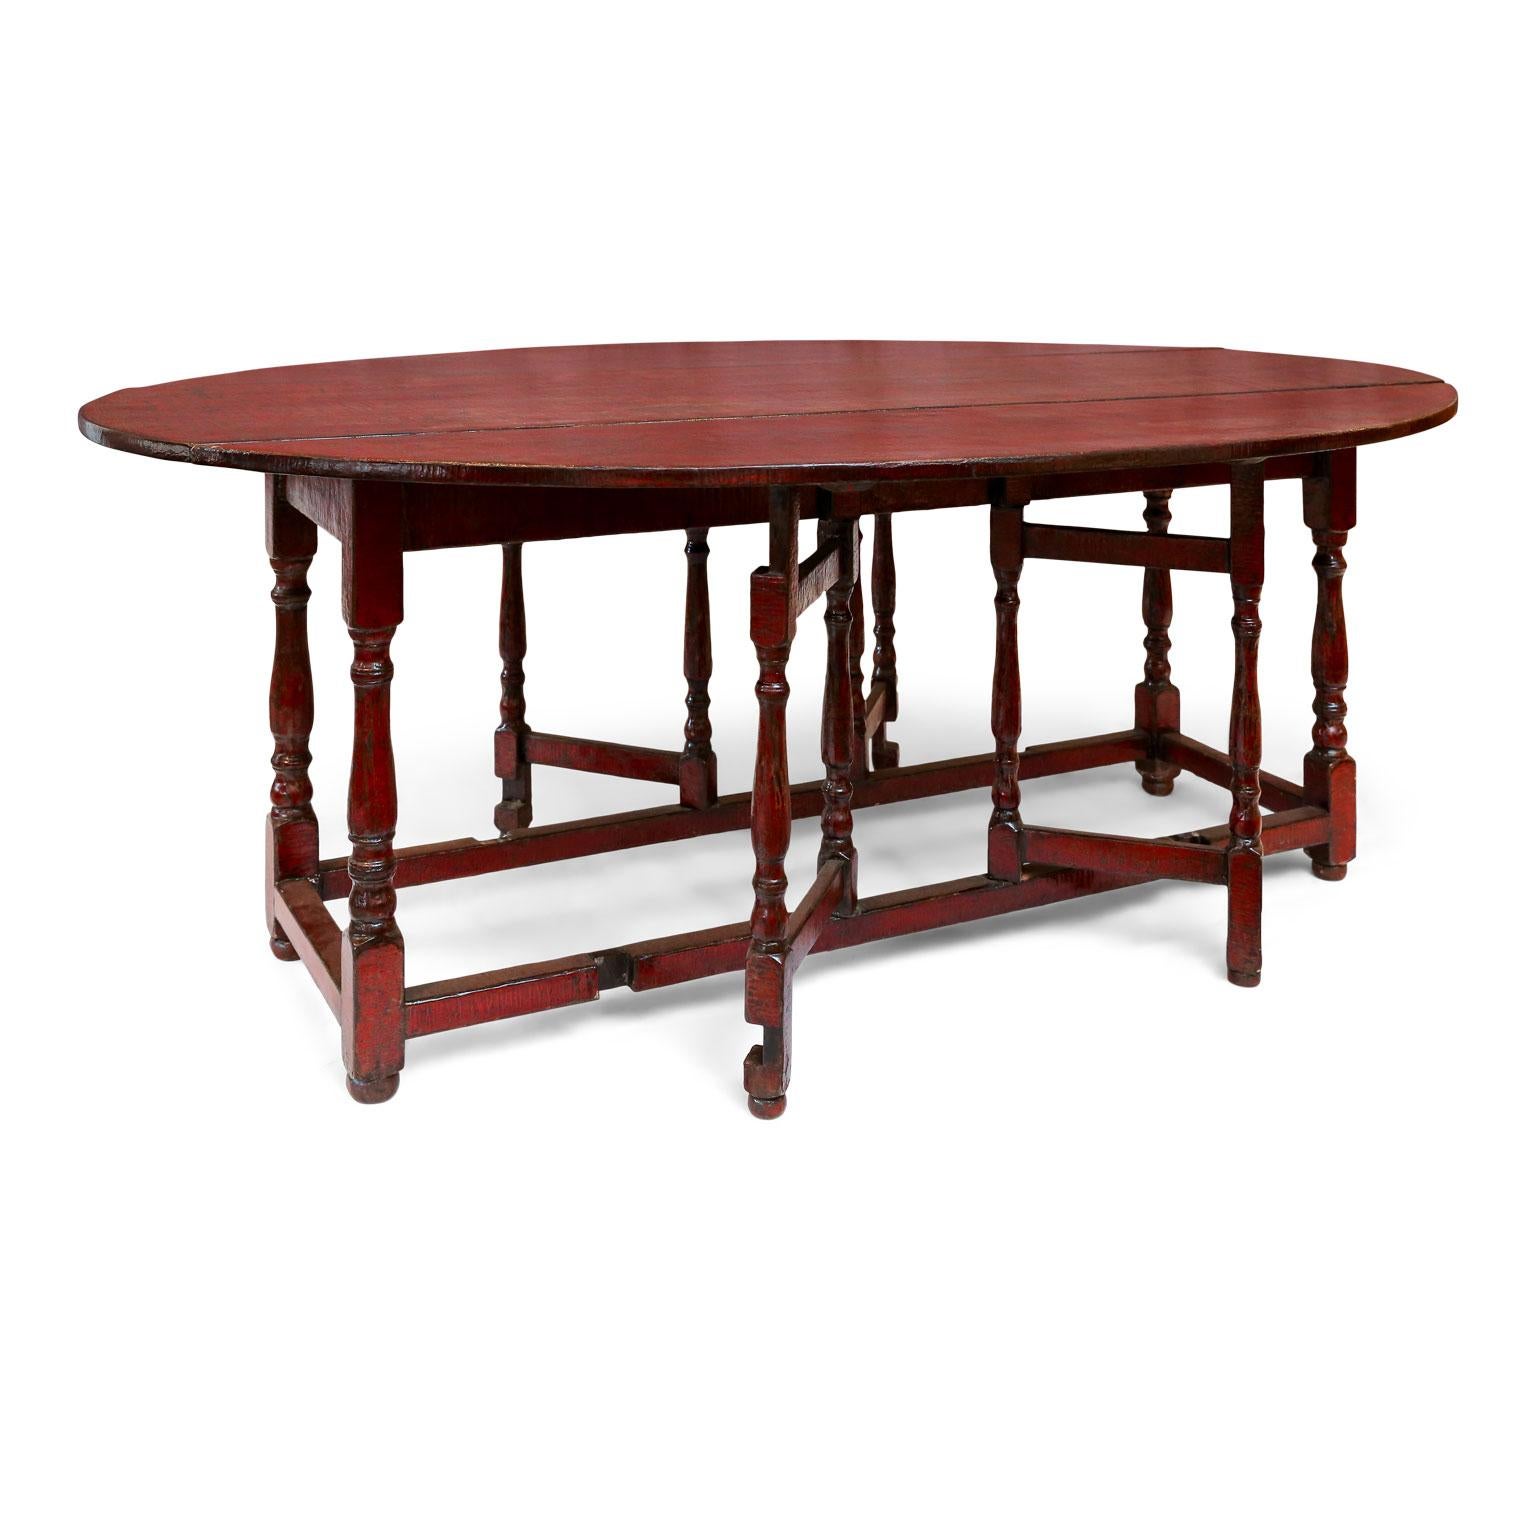 Red lacquered English table. Constructed circa 1950 using traditional methods – very sturdy. Oval shaped with leaves that drop transforming table into a wide demilune console or sofa table. Gate-leg base supports leaves. Untouched original red